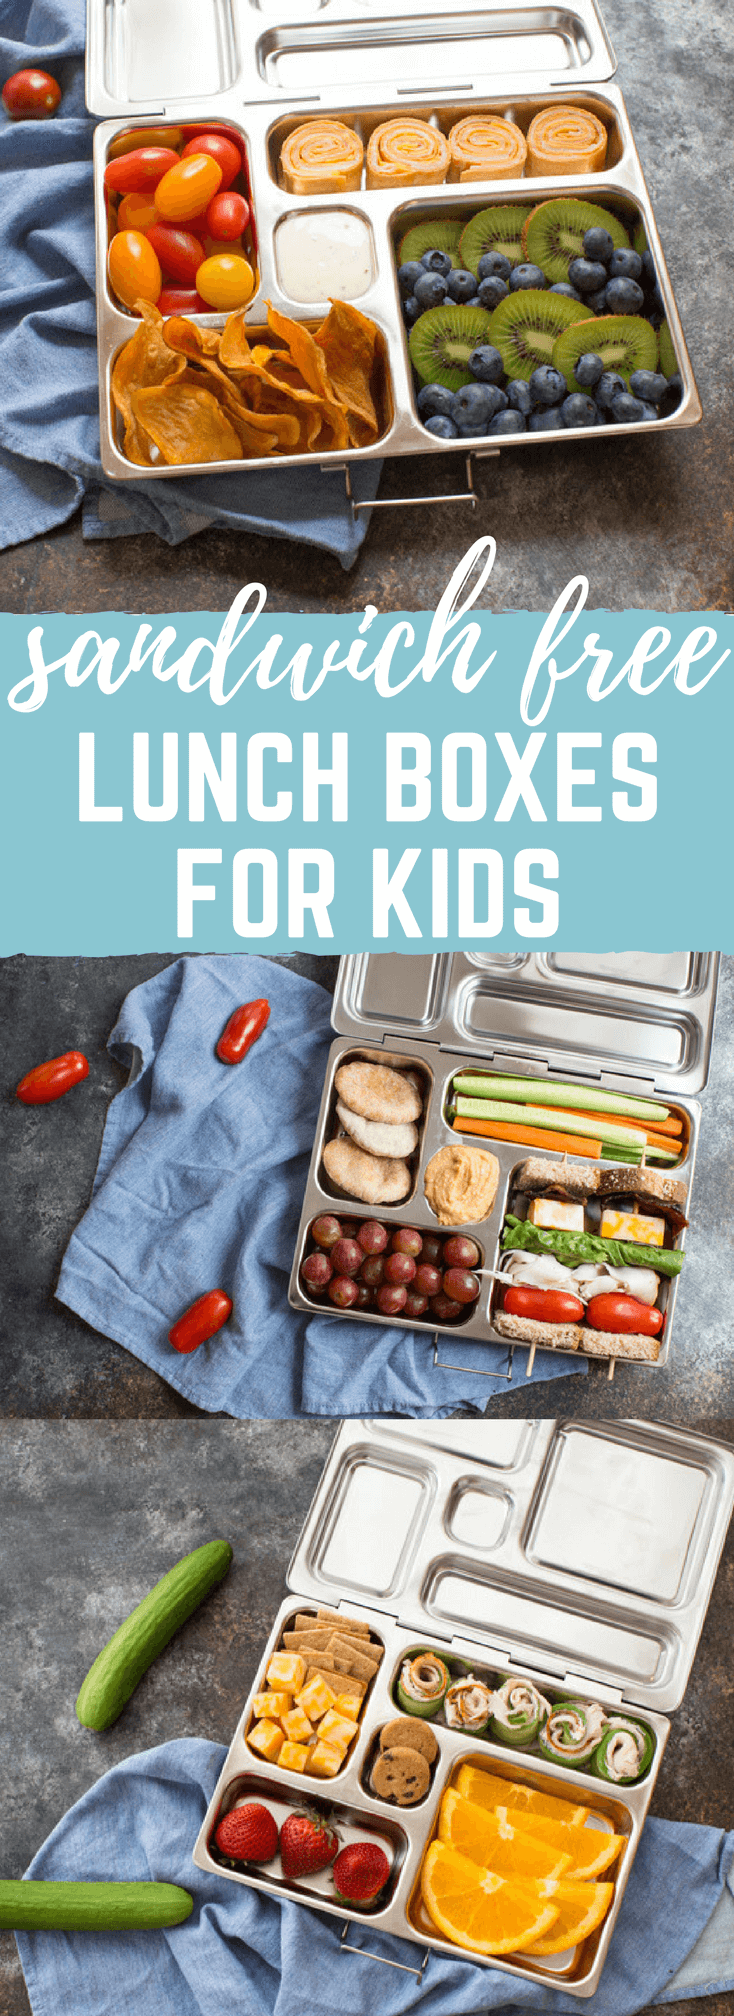 Sandwich Free Kid Friendly Lunch Box Ideas | lunches easy to meal prep